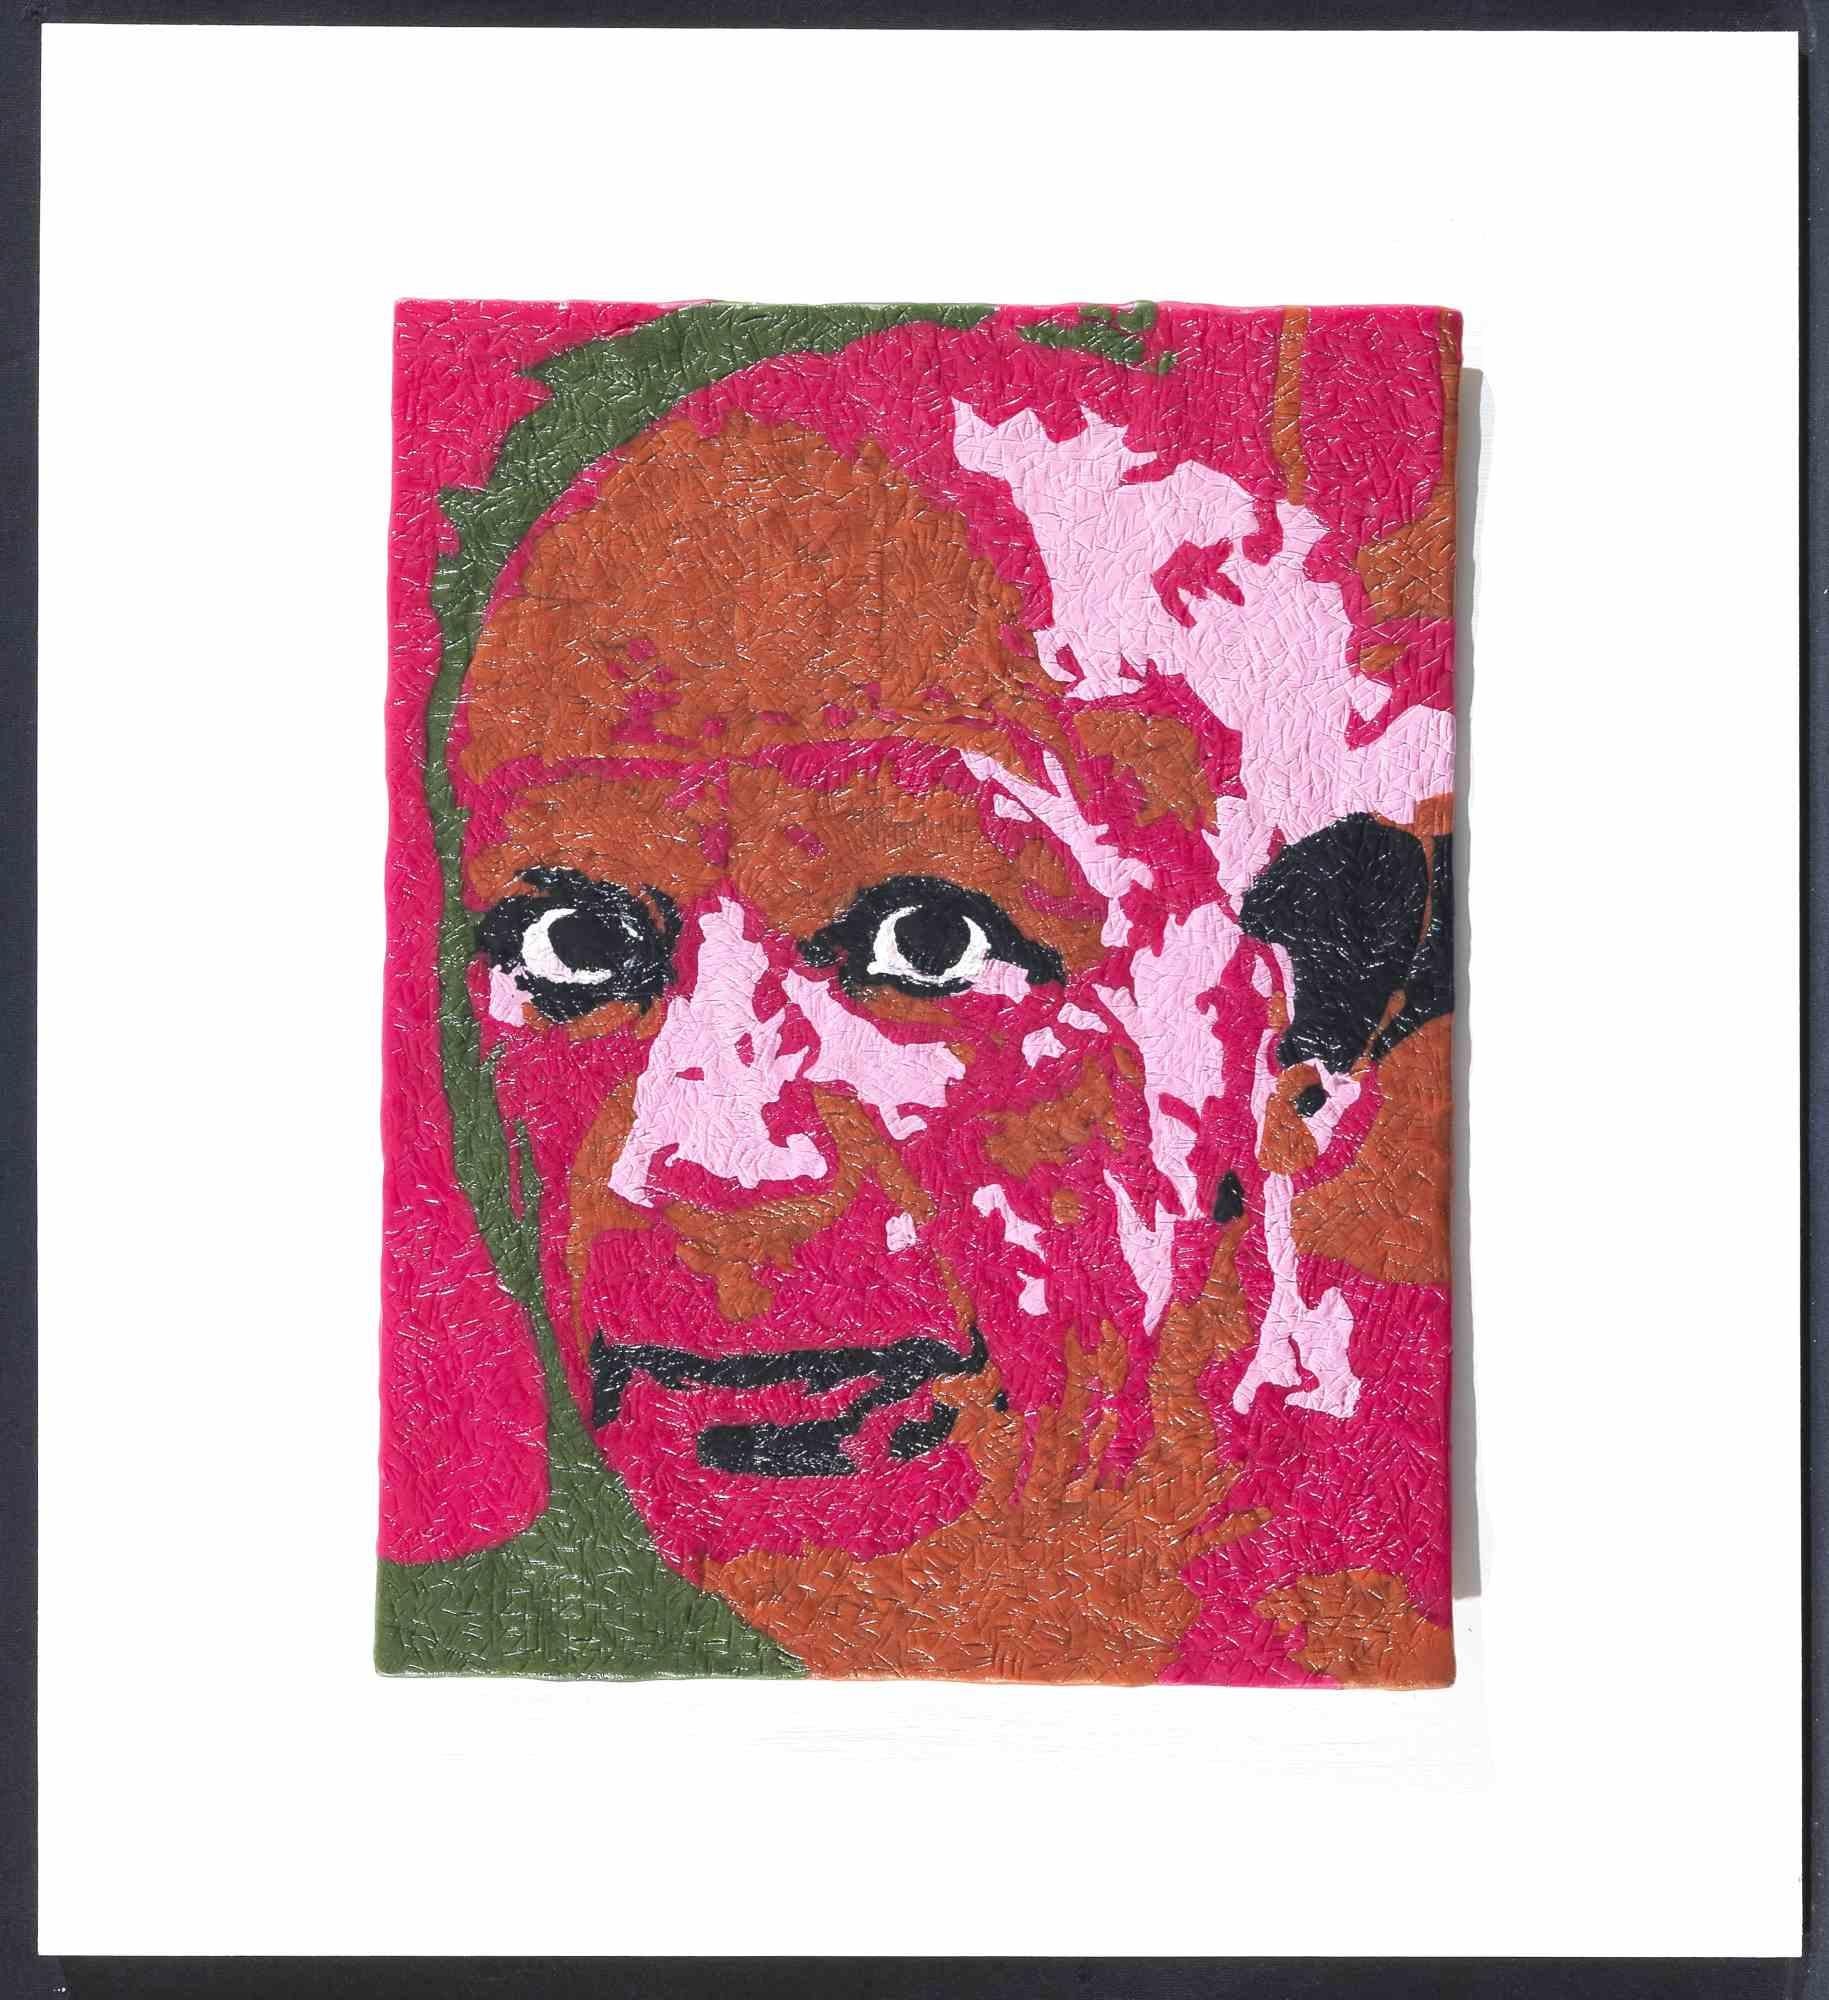 Picasso is an original Contemporary Arwork realized by the Italian artist Maurizio Savini (b. Rome, 1962) in 2014. 

Original Encaustic of chewing gum on board. 

Hand-signed by the artist on the back of the canvas.

The Certificate of Authenticity